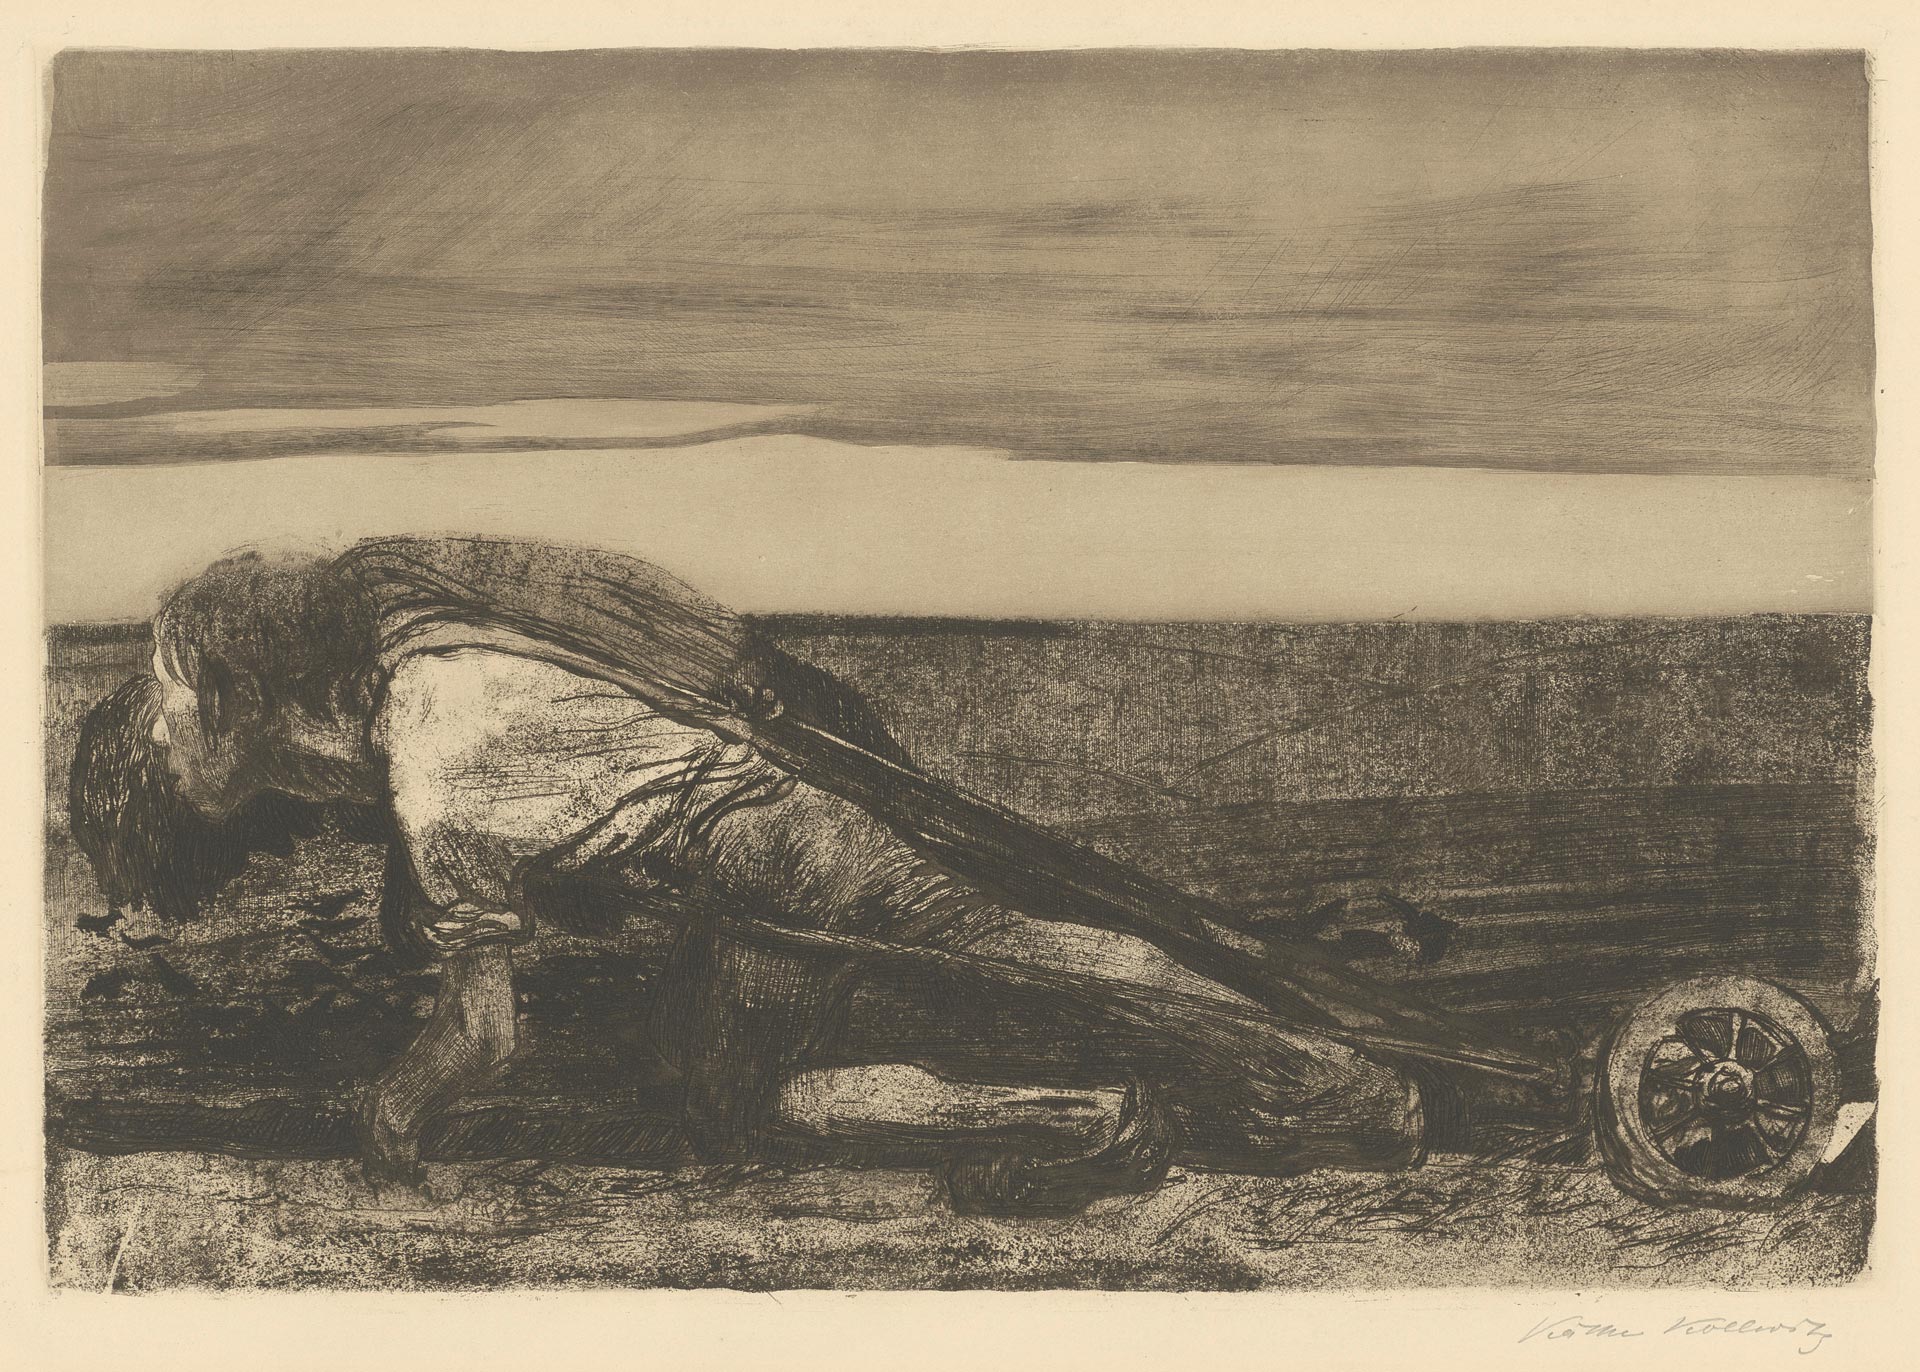 Käthe Kollwitz, The Ploughmen, sheet 1 of the cycle »Peasants War«, 1907, line etching, drypoint, aquatint, reservage, sandpaper, needle bundle and soft ground with imprint of Ziegler transfer paper, Kn 99 VIII b, Cologne Kollwitz Collection © Käthe Kollwitz Museum Köln